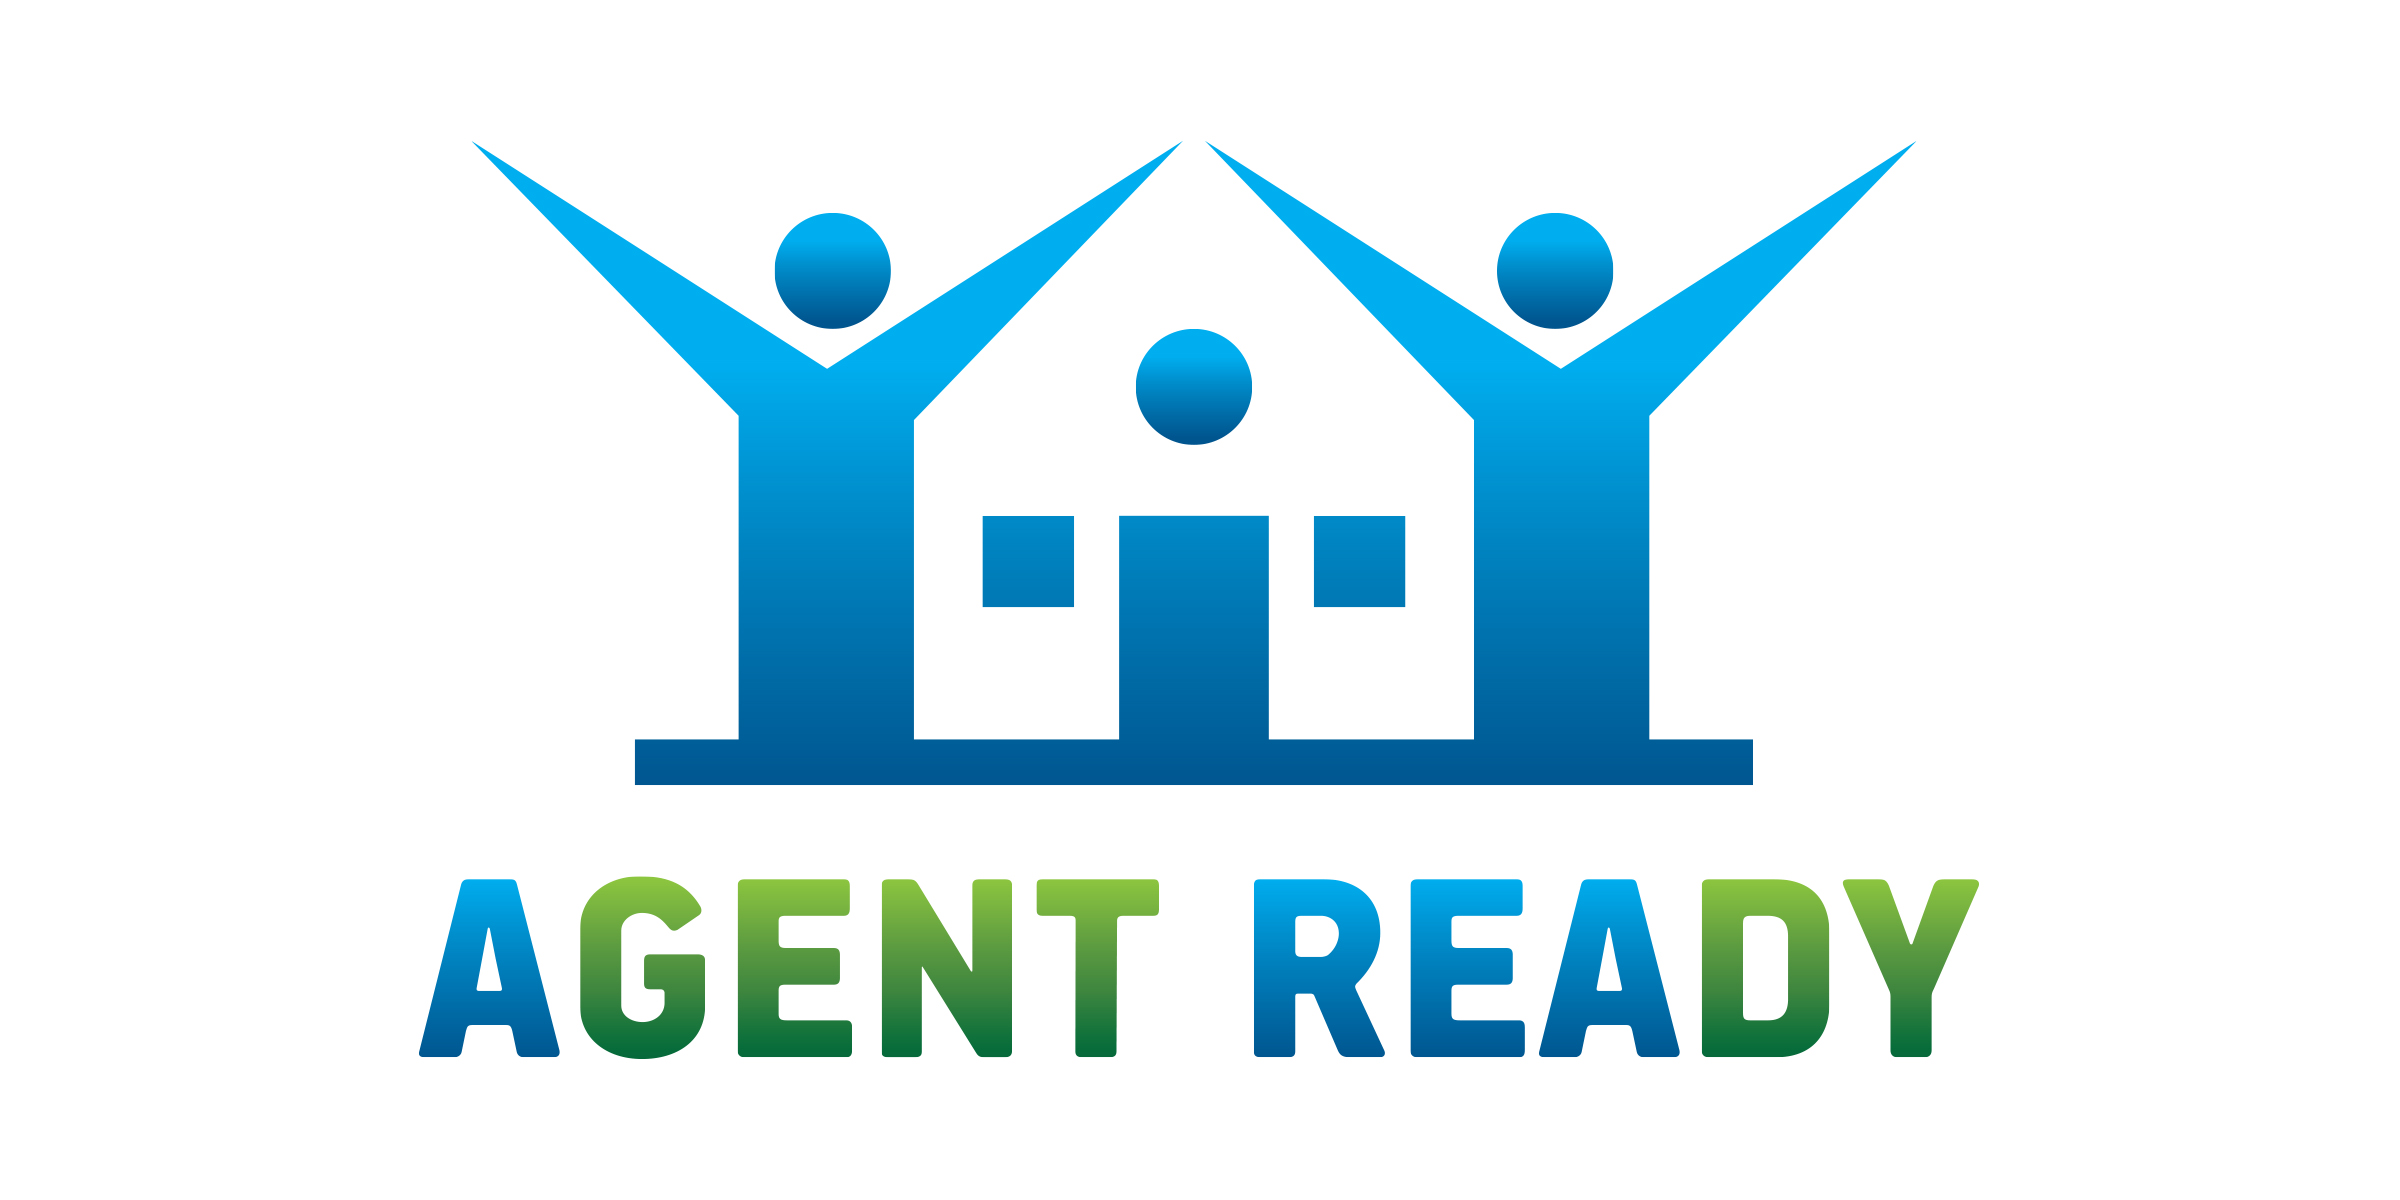 Agent Ready is an app that locates nearby real estate agents by GPS.